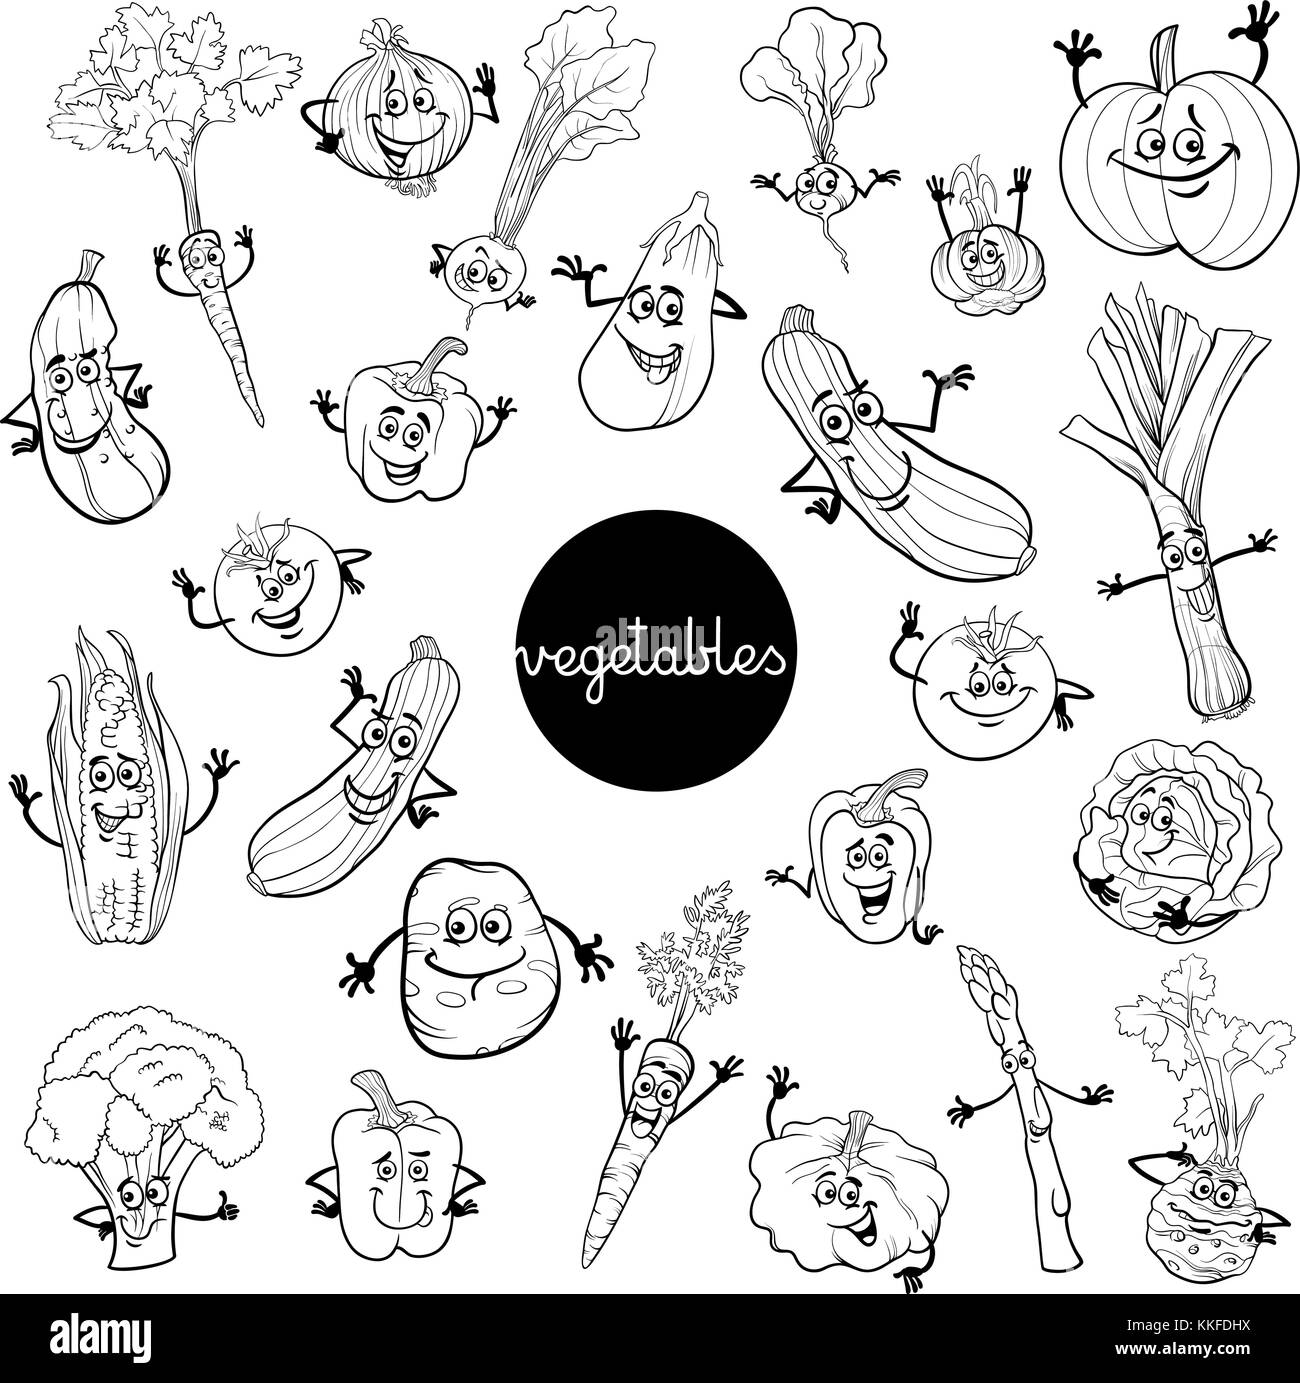 Black and White Cartoon Illustration of Vegetables Comic Food Characters Big Set Color Book Stock Vector